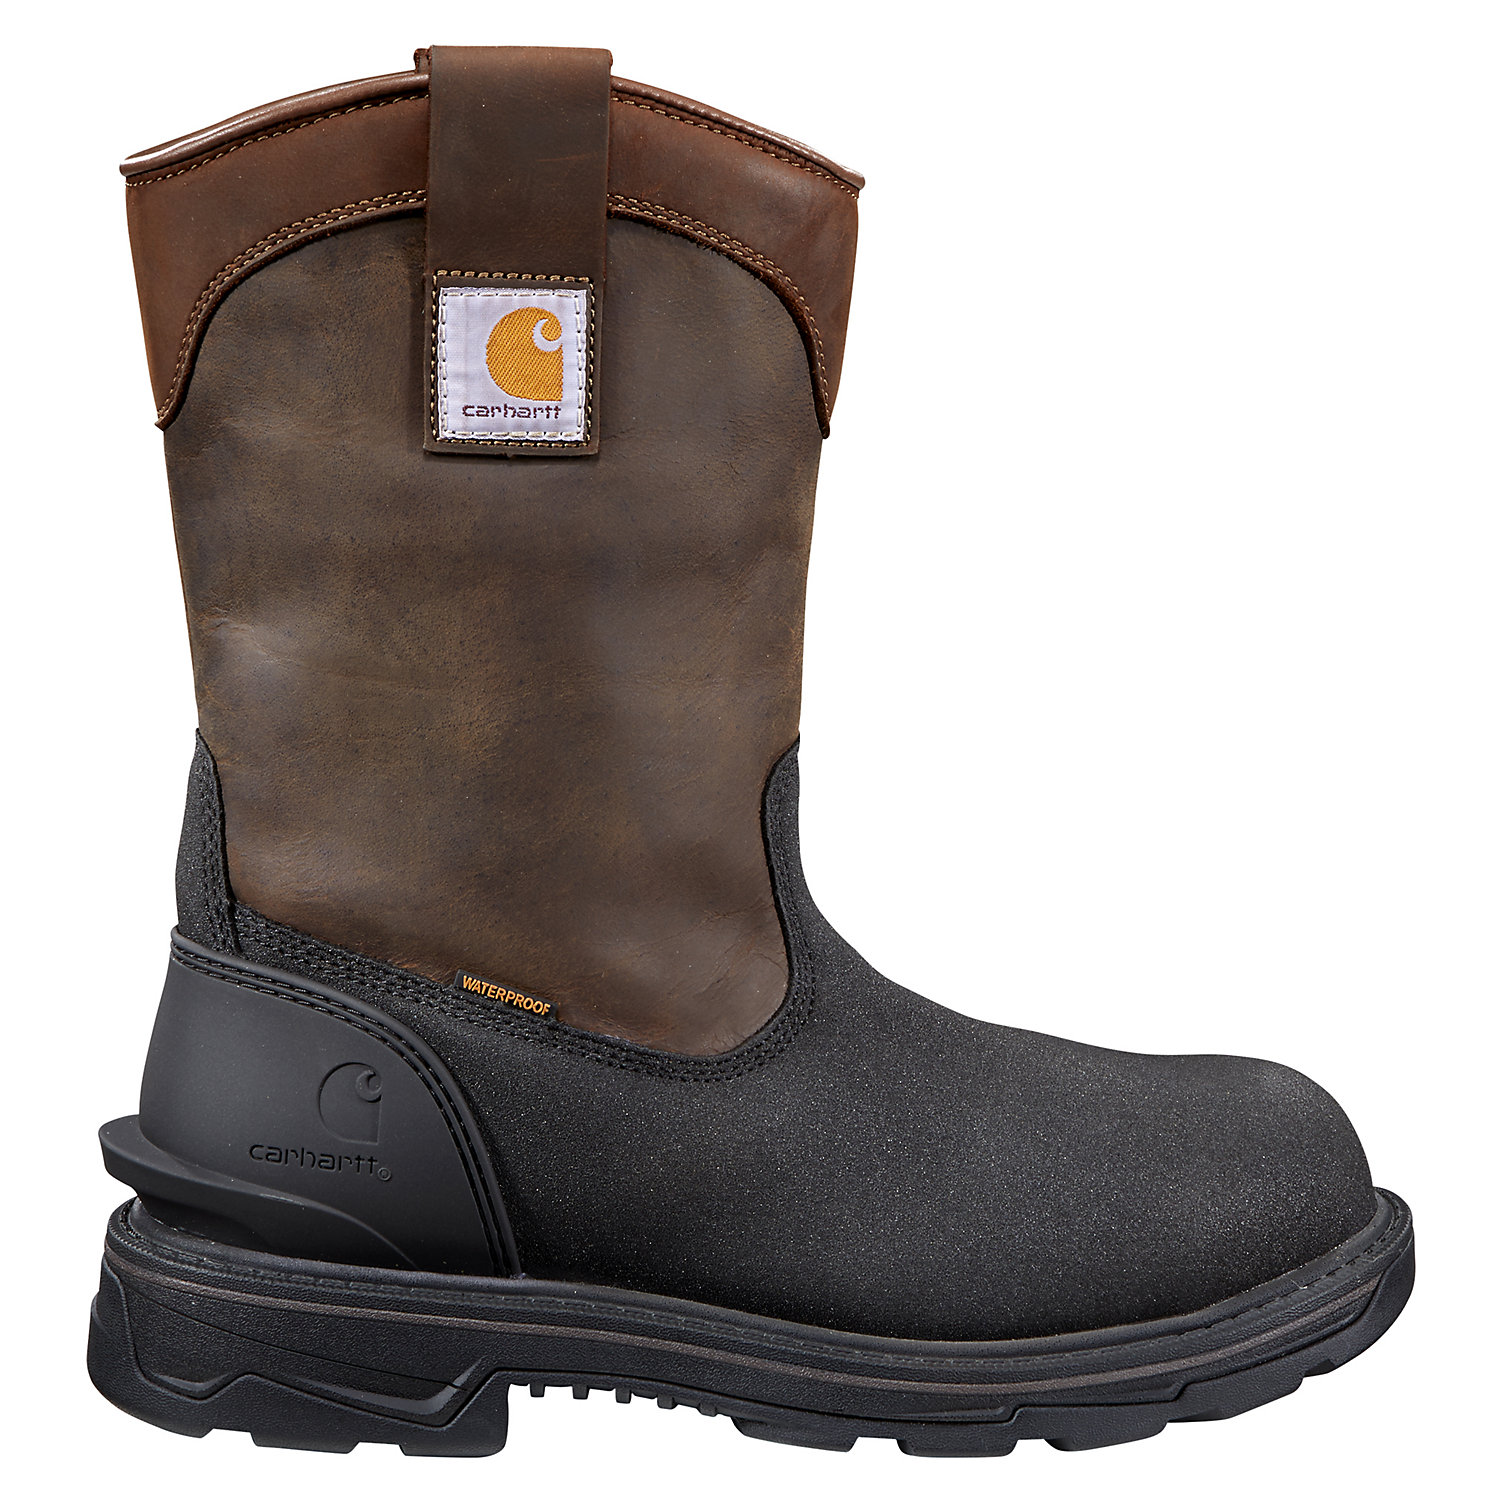 Carhartt Mens Ironwood Waterproof Insulated 11 Inch Wellington Boot - Alloy Safety Toe